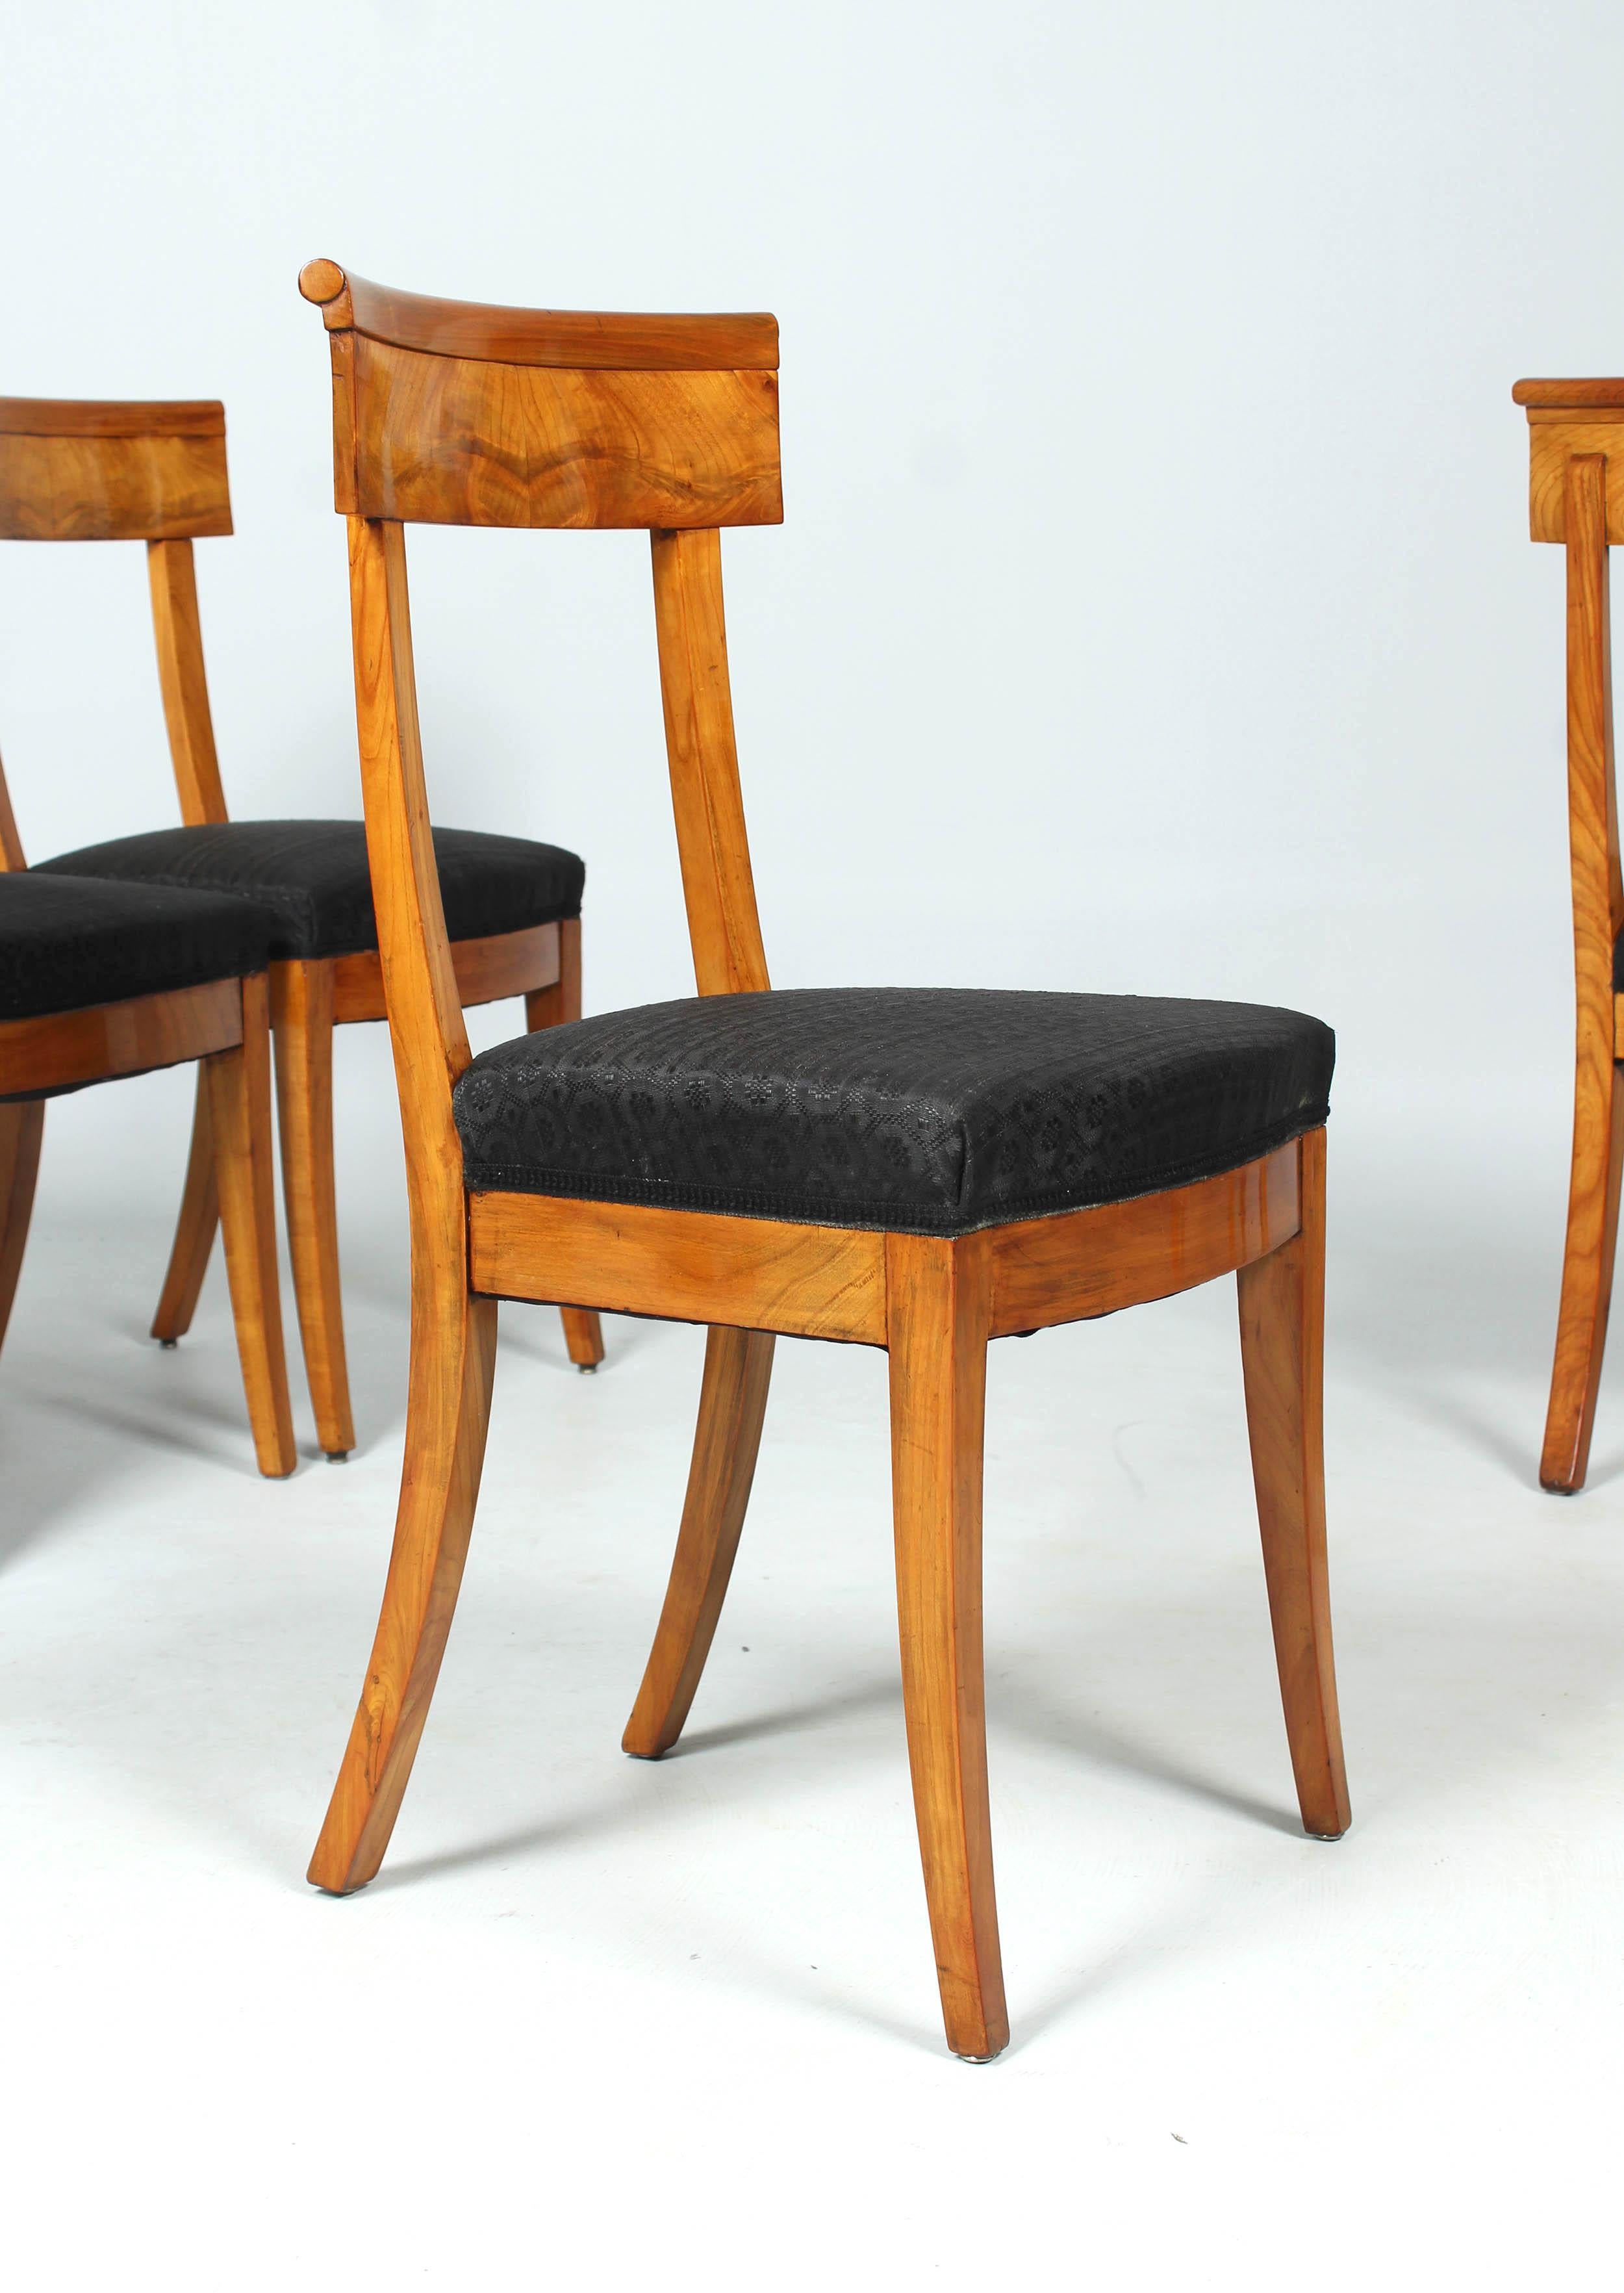 Early 19th Century Biedermeier Chairs, Set of Eight, Cherrywood, Circa 1820 In Good Condition For Sale In Greven, DE